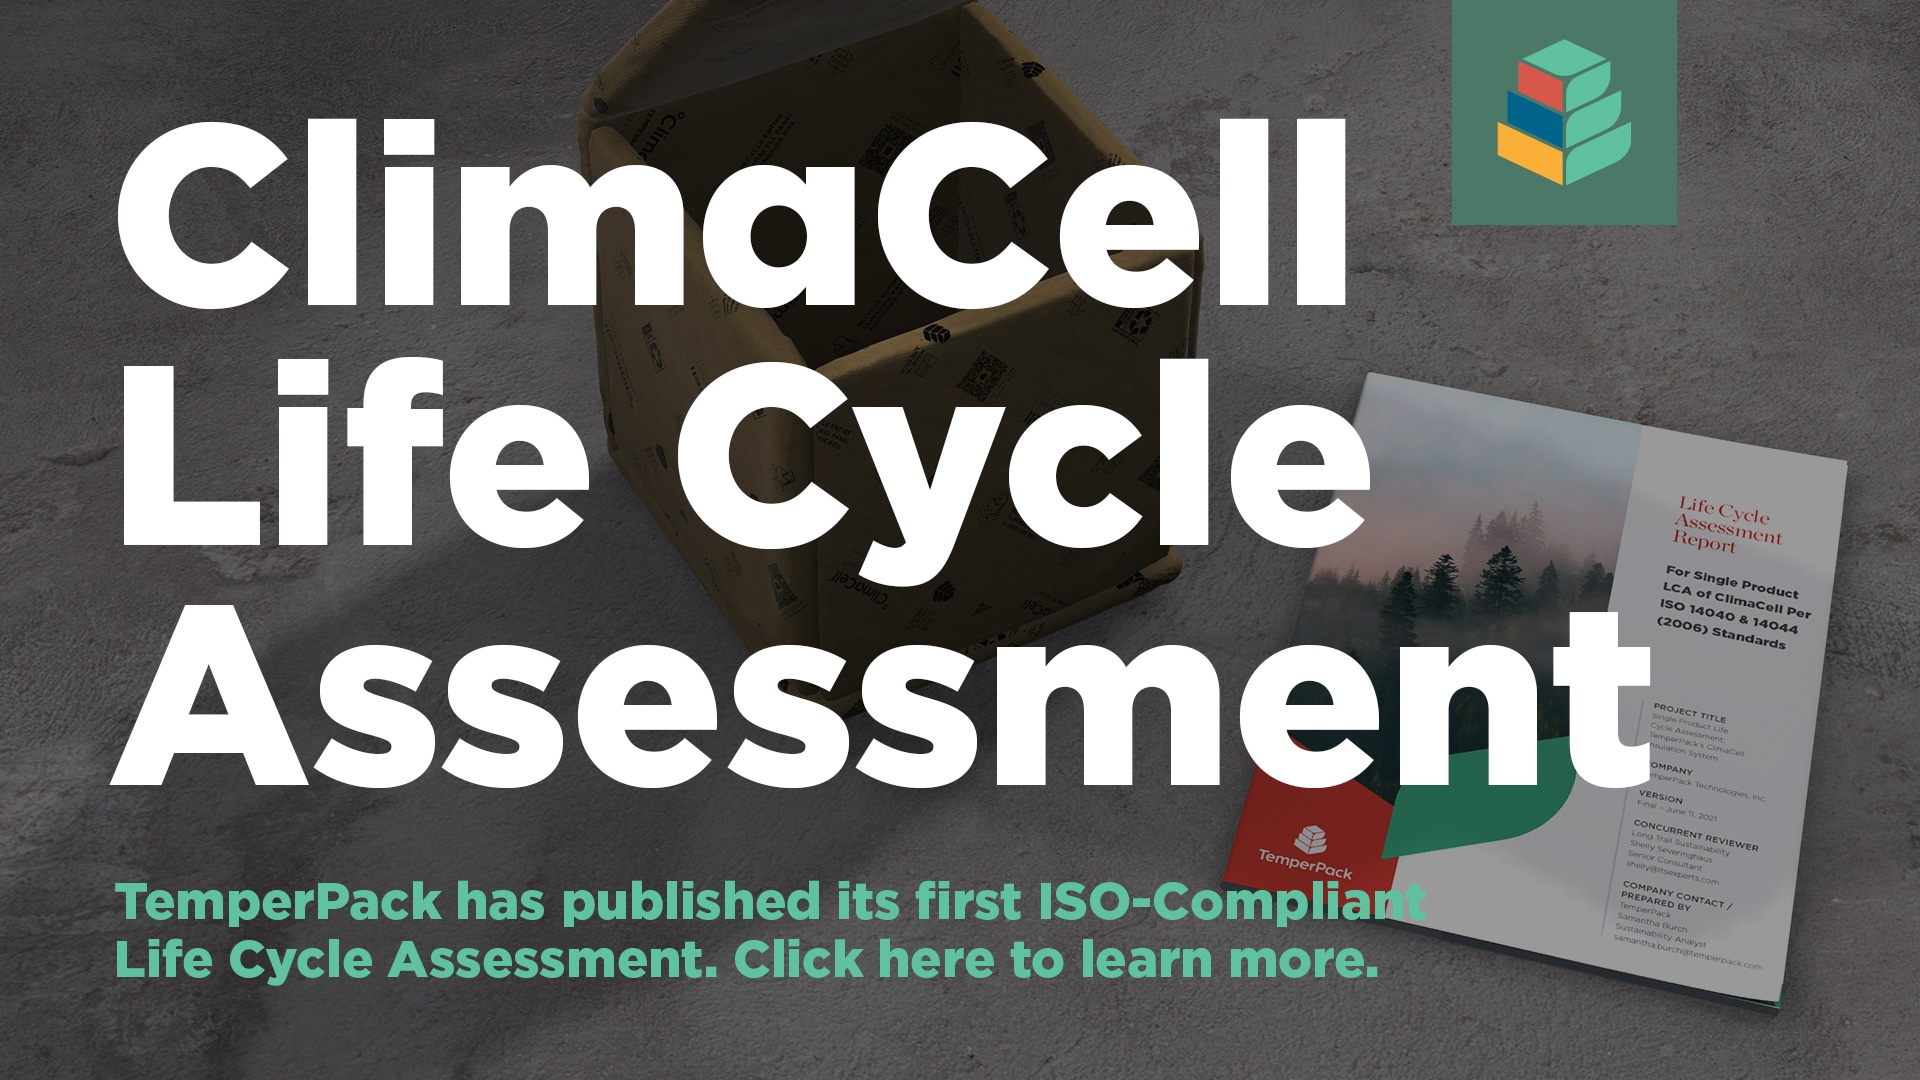 ClimaCell life cycle assessment